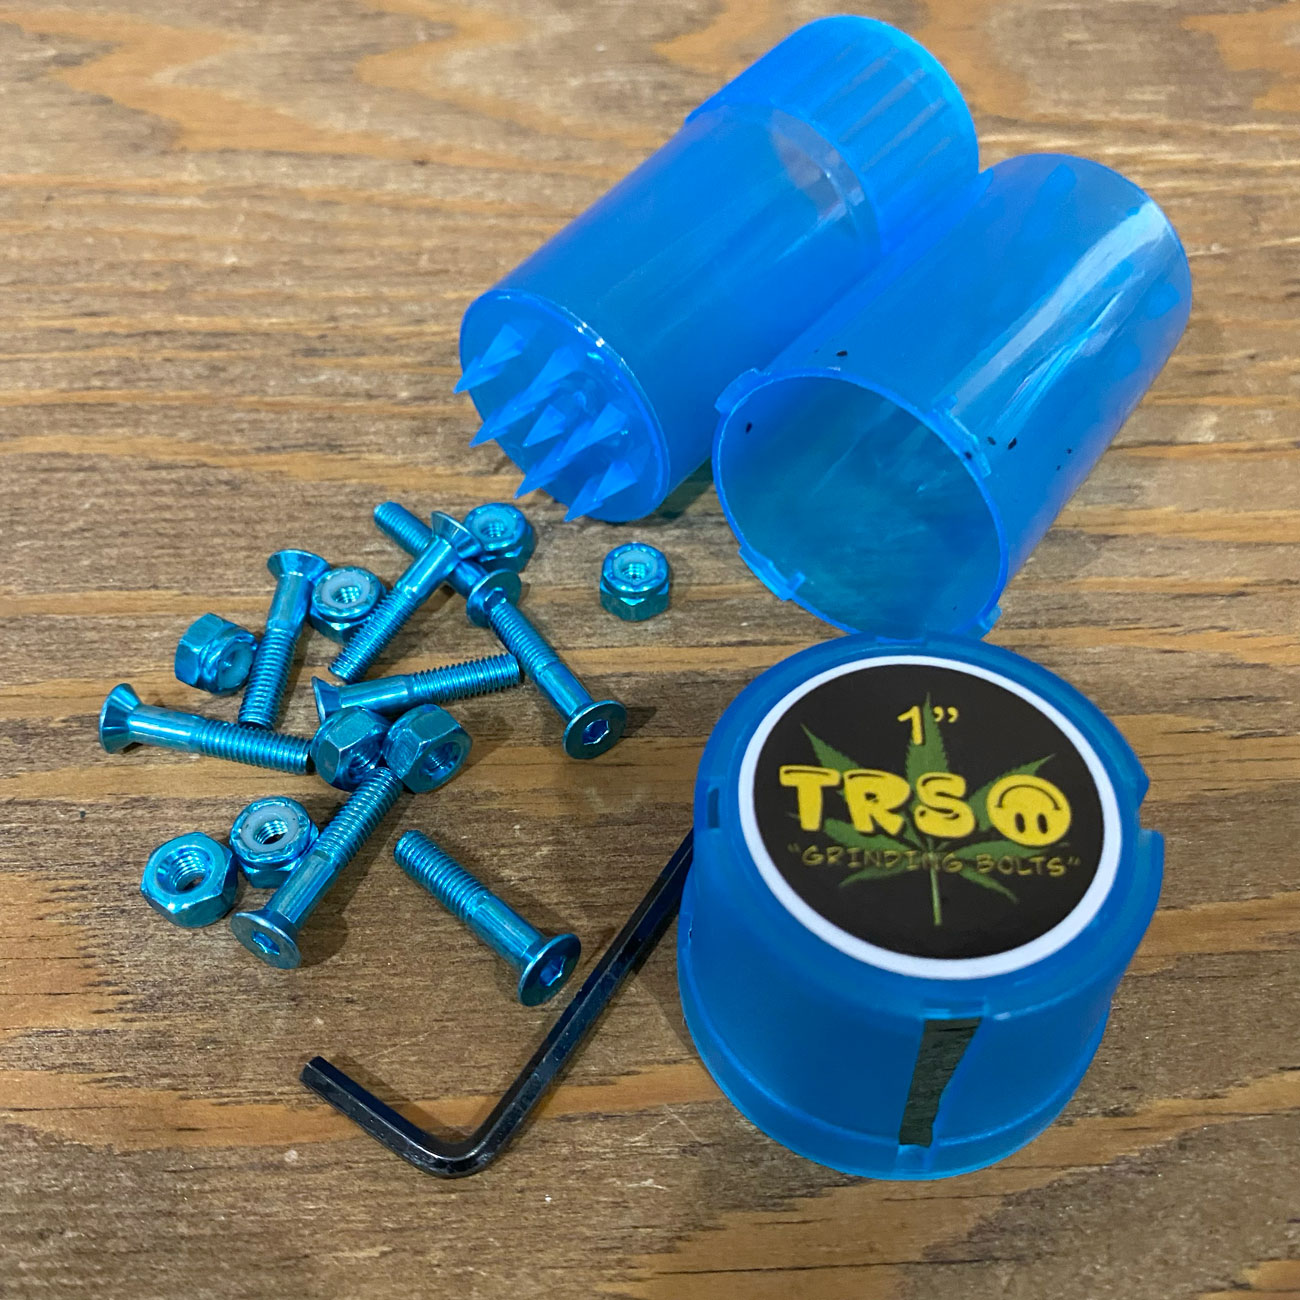 【1inch 六角】TRS GRINDING BOLTS